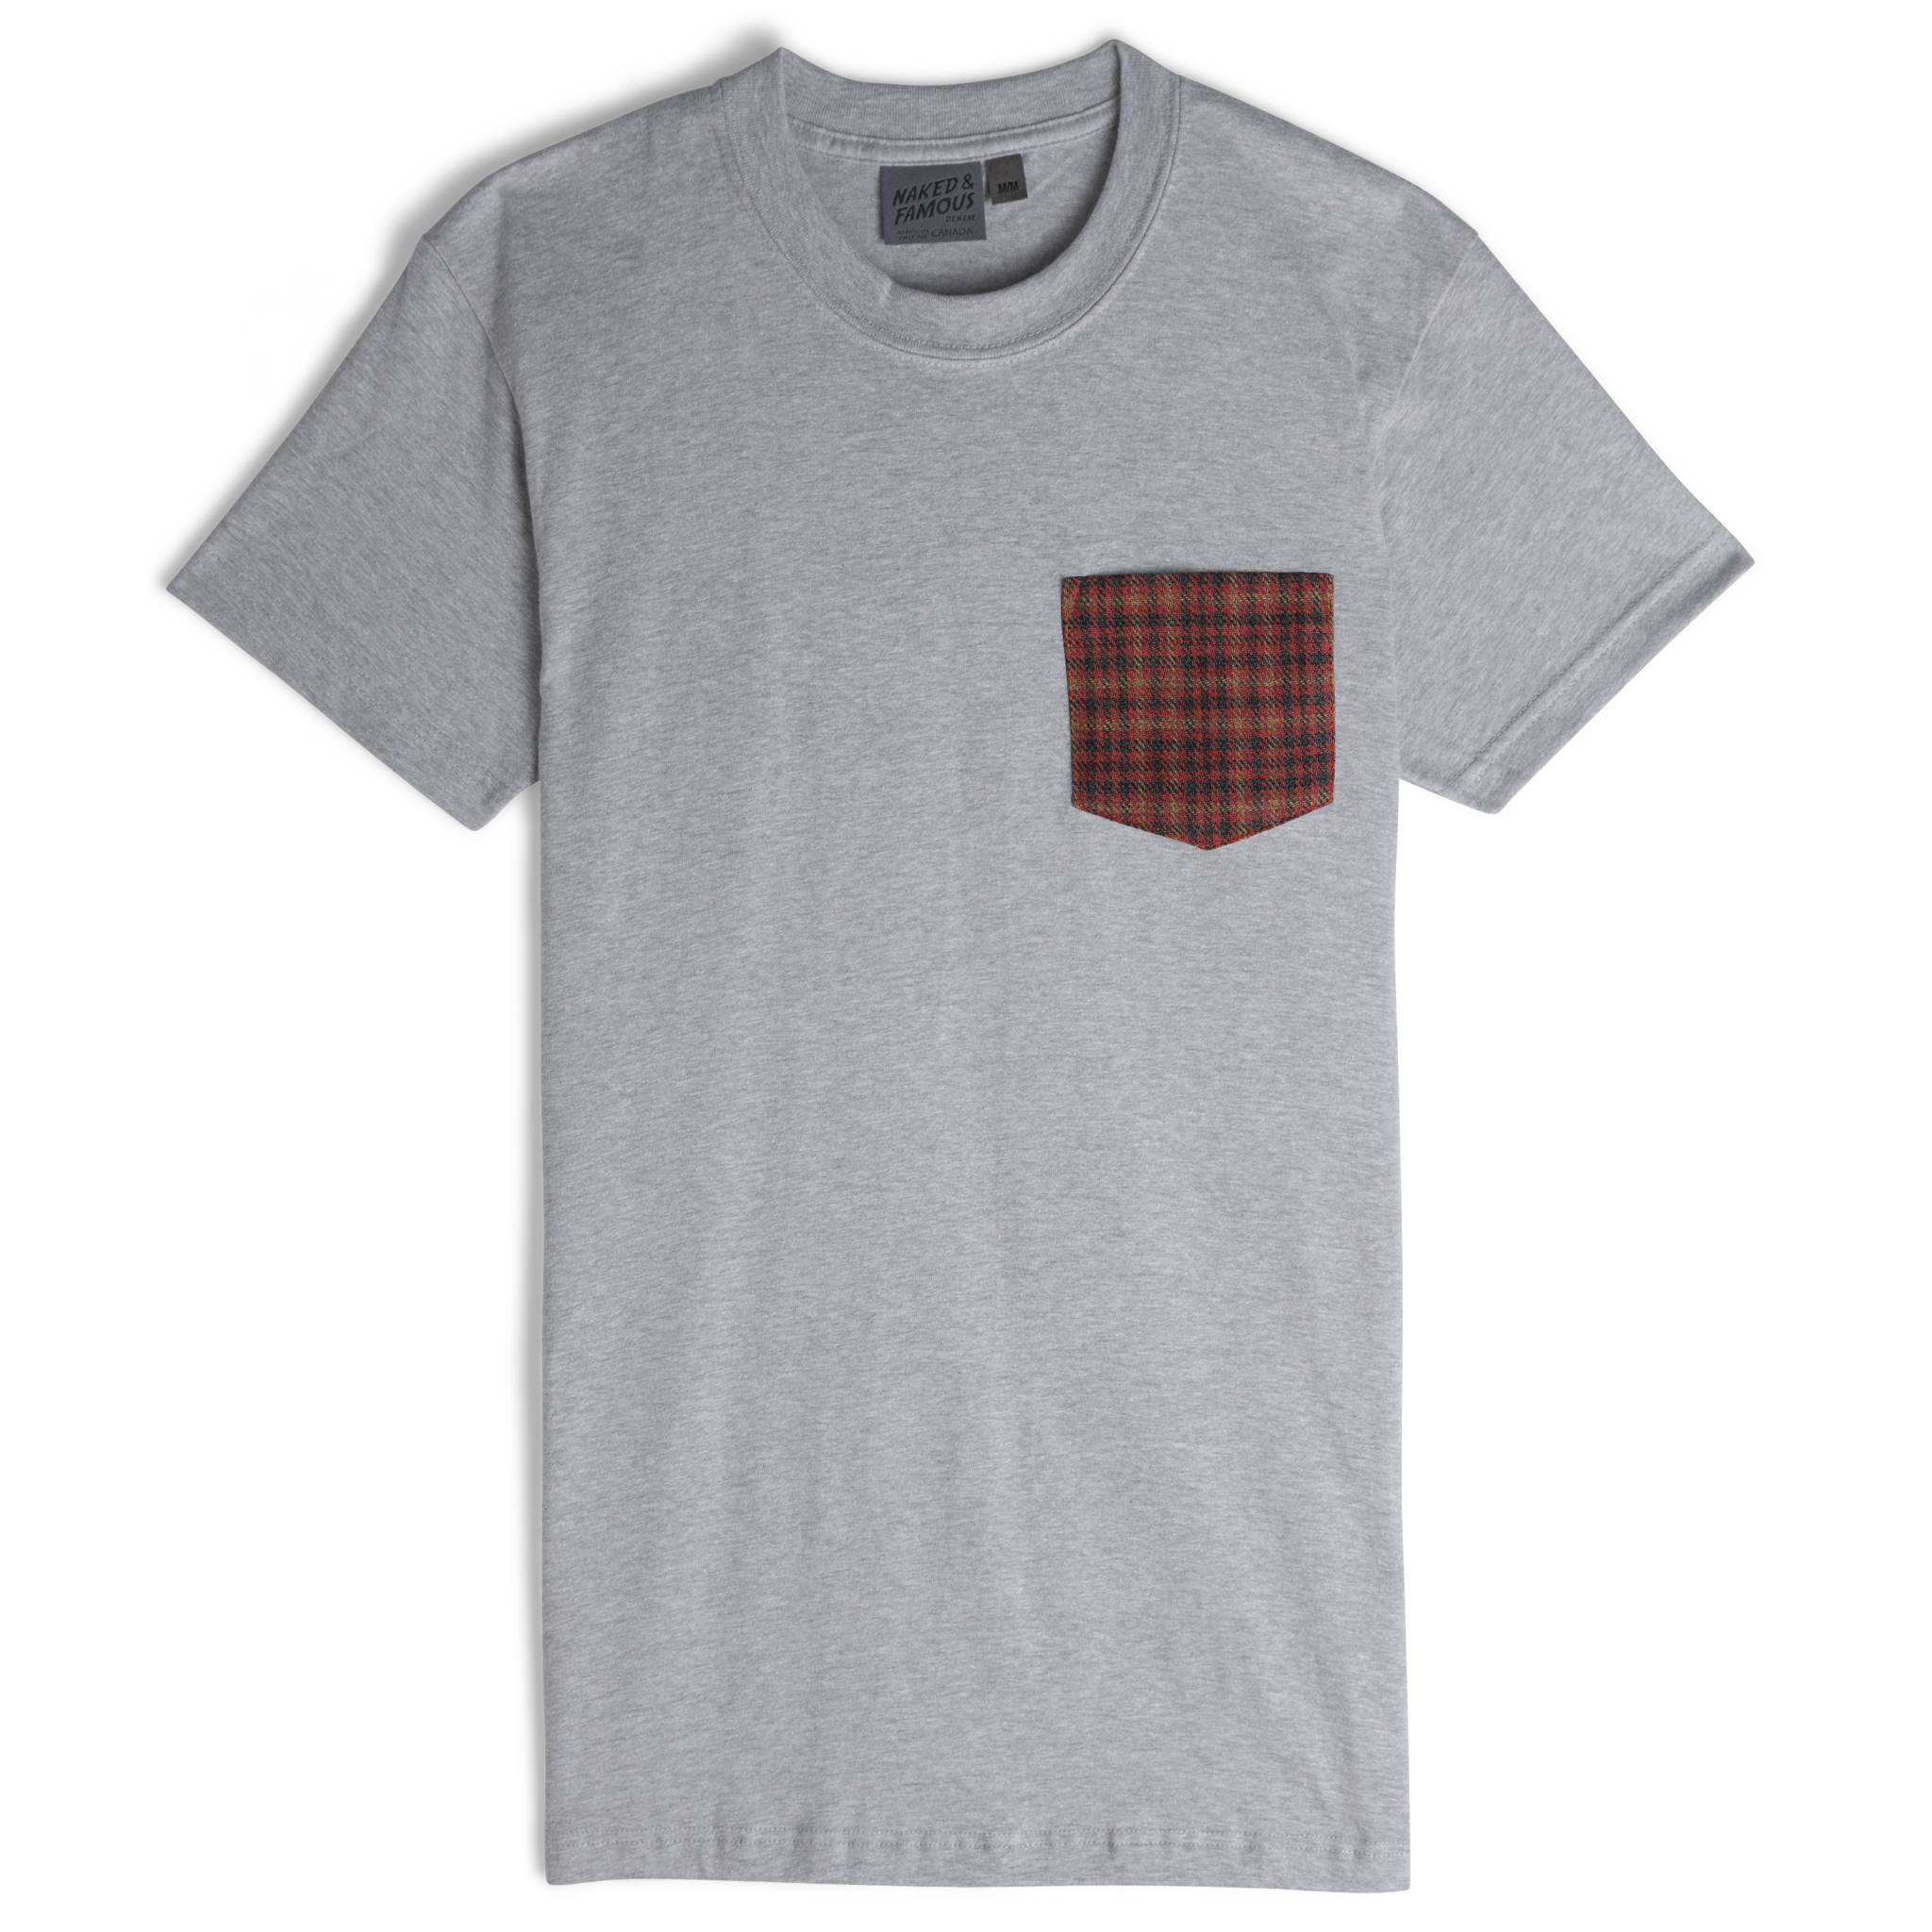  Pocket Tee - Heather Grey + Heavy Vintage Flannel Red - flat front 